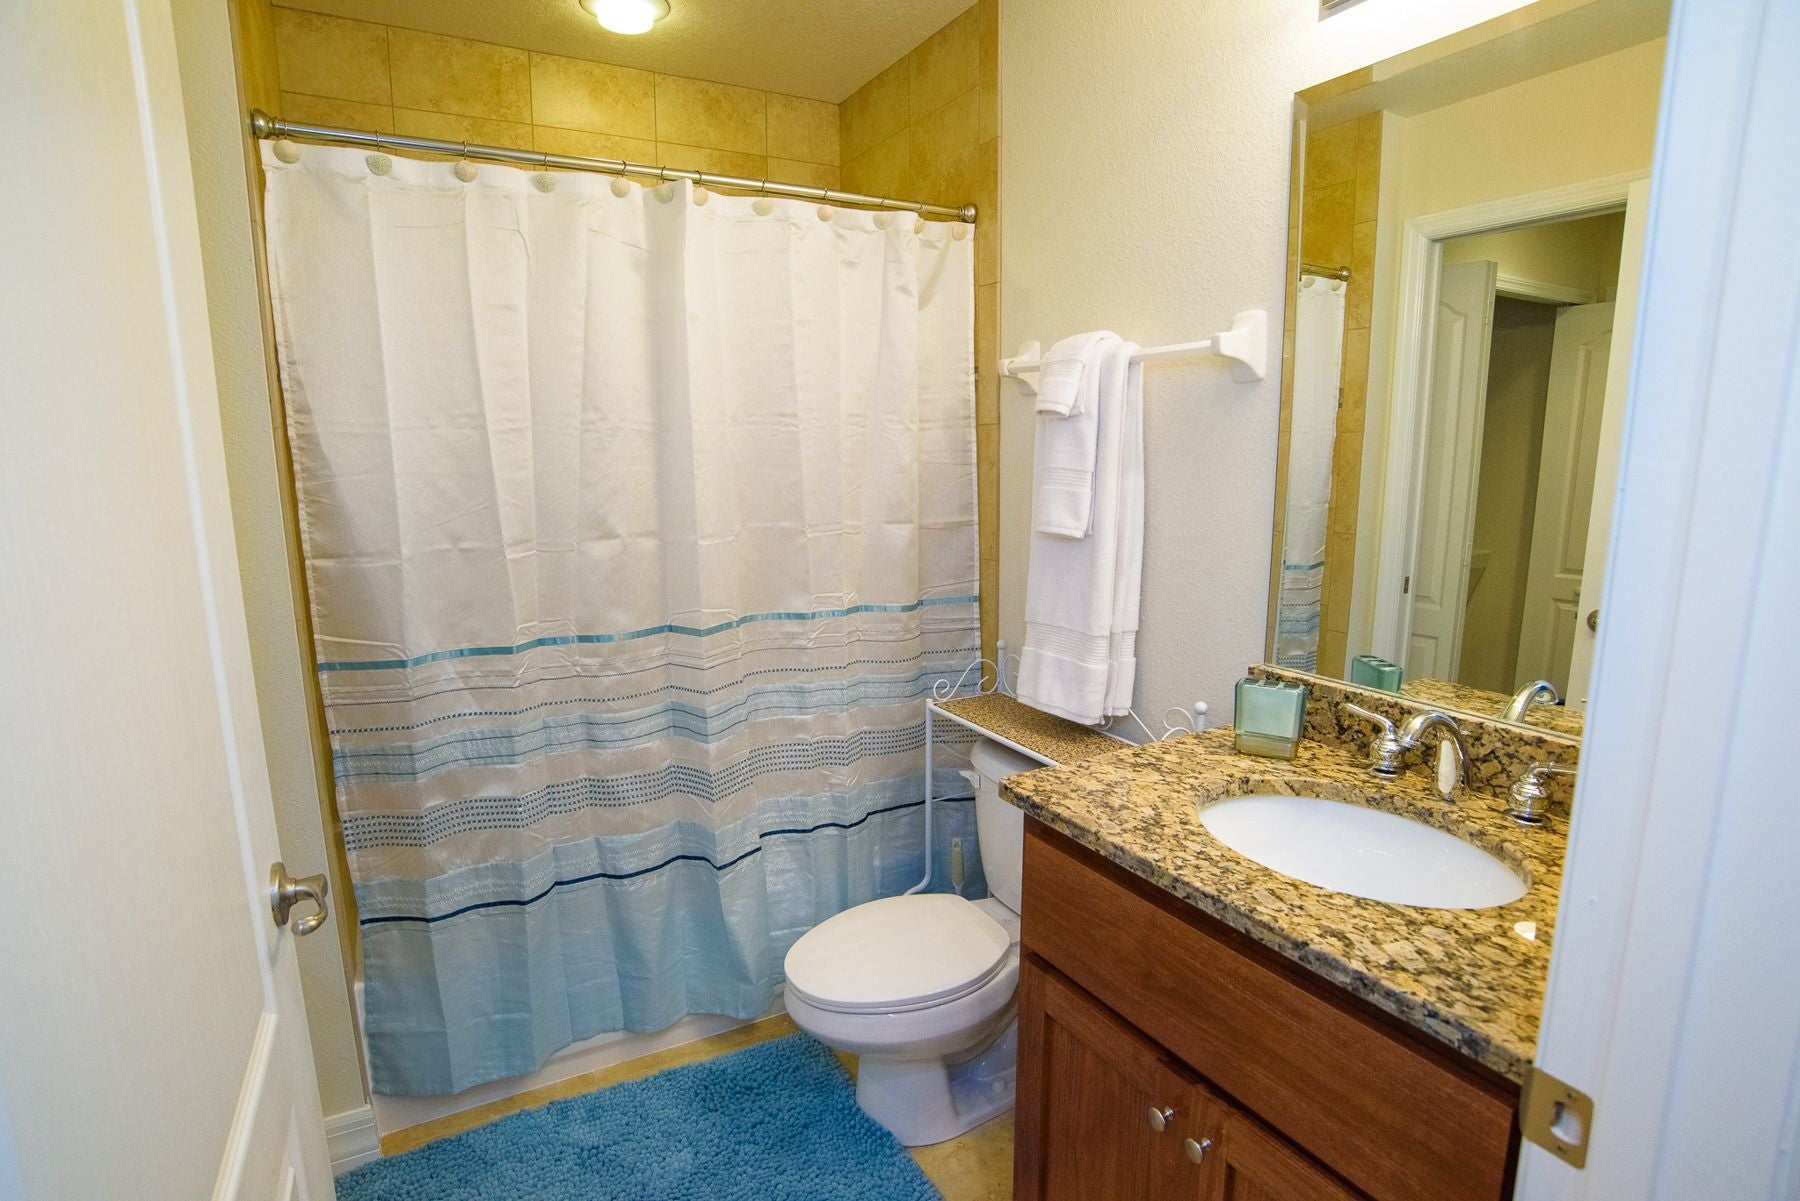 Guest bathroom and shower